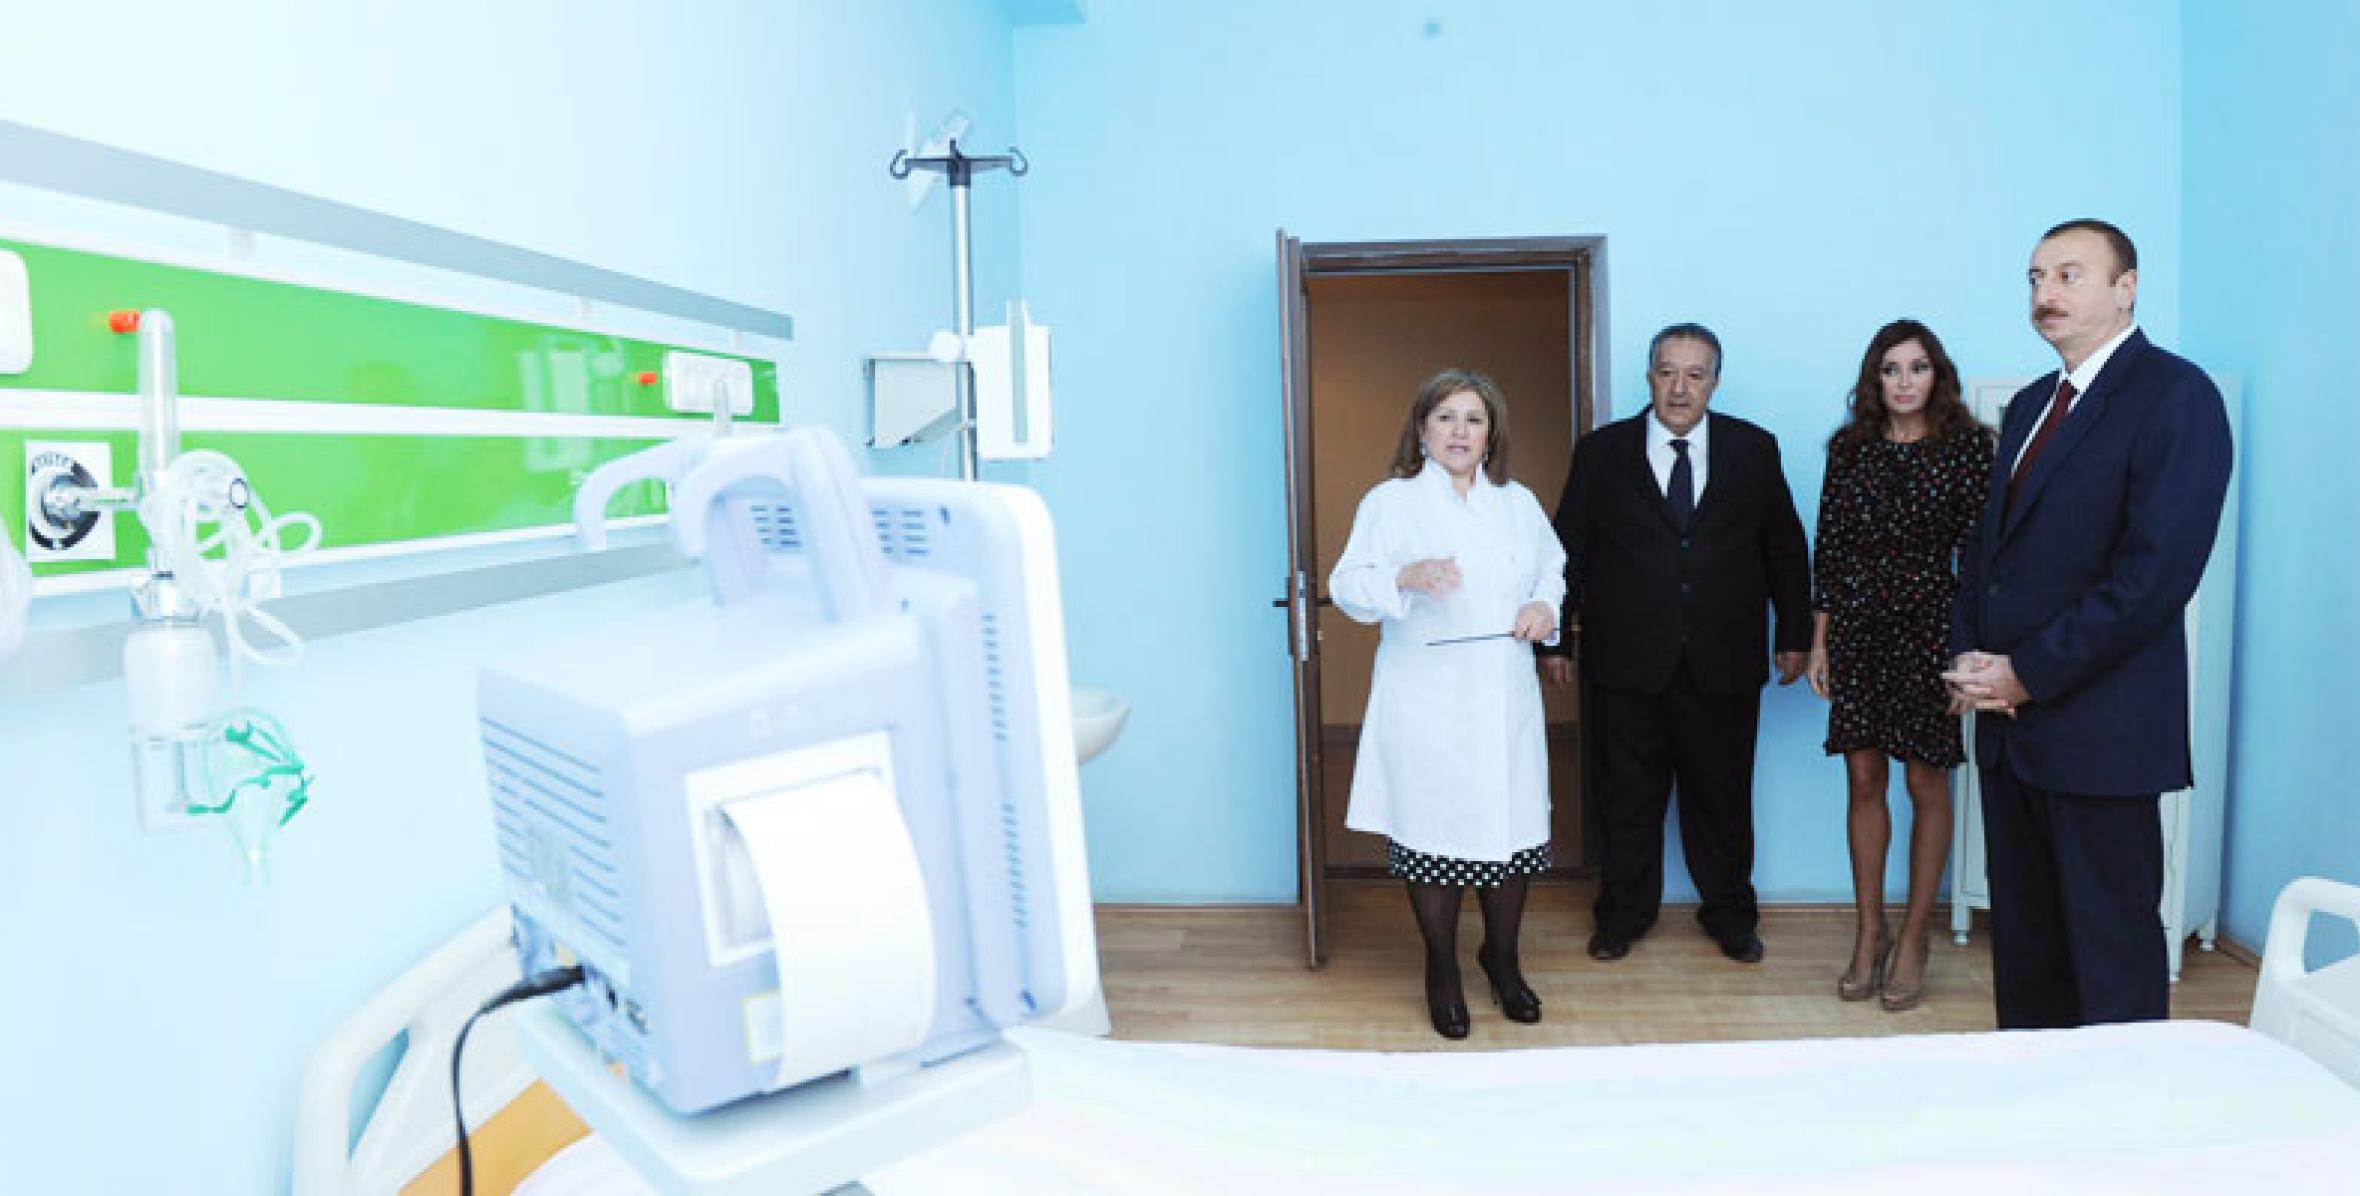 Ilham Aliyev participated at the opening of a new building of Agdam Region’s Central Hospital